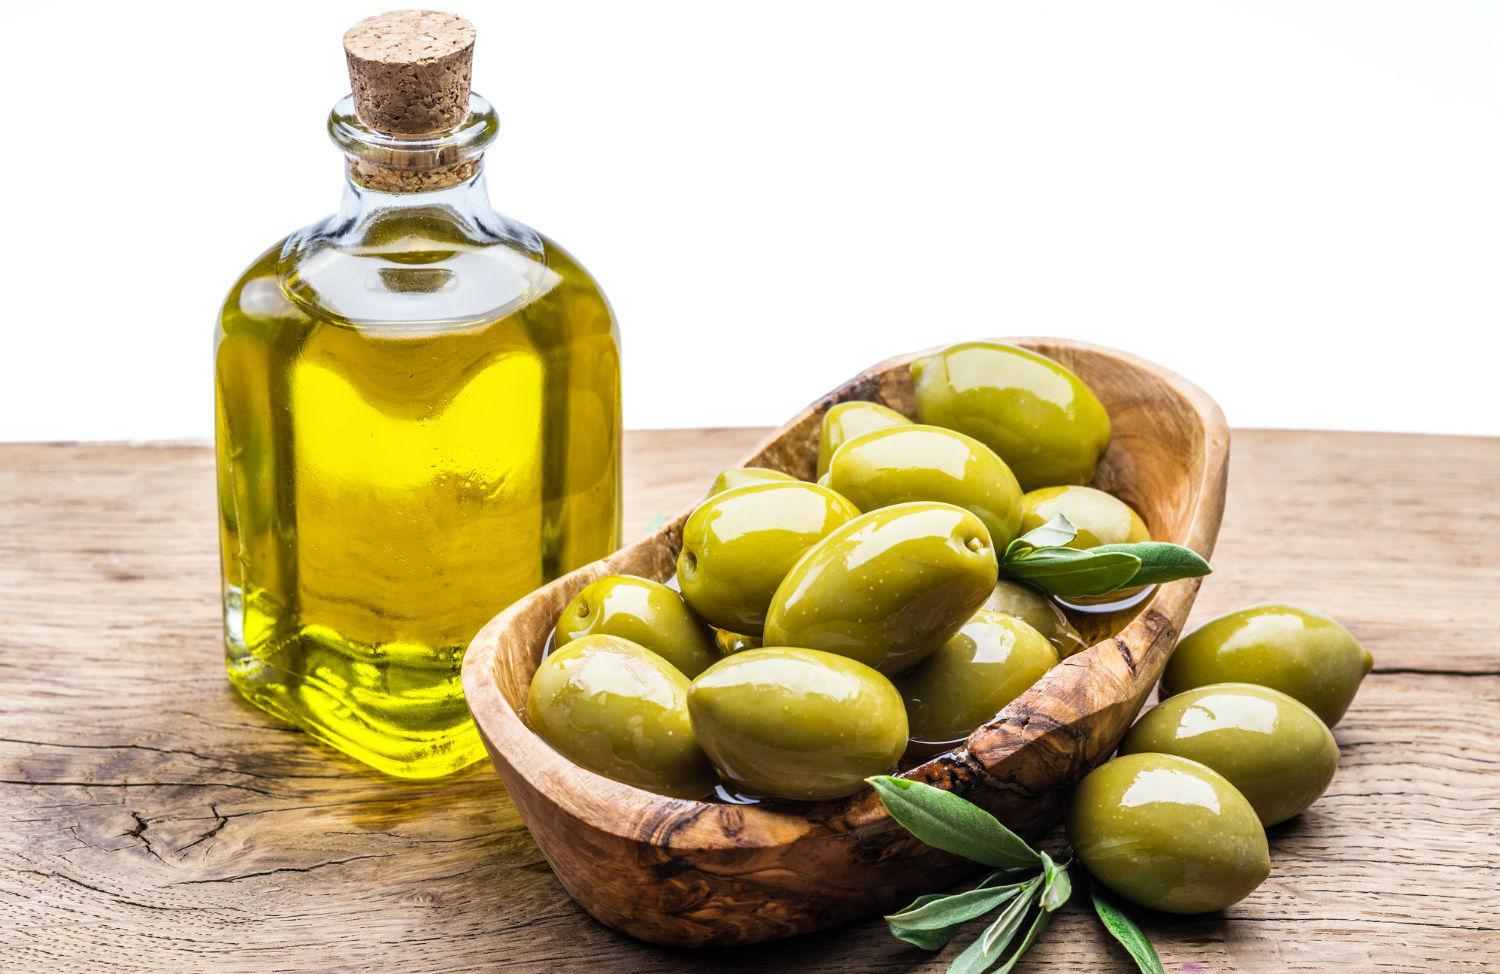 Olive Oil For The Face What Properties Does It Have?